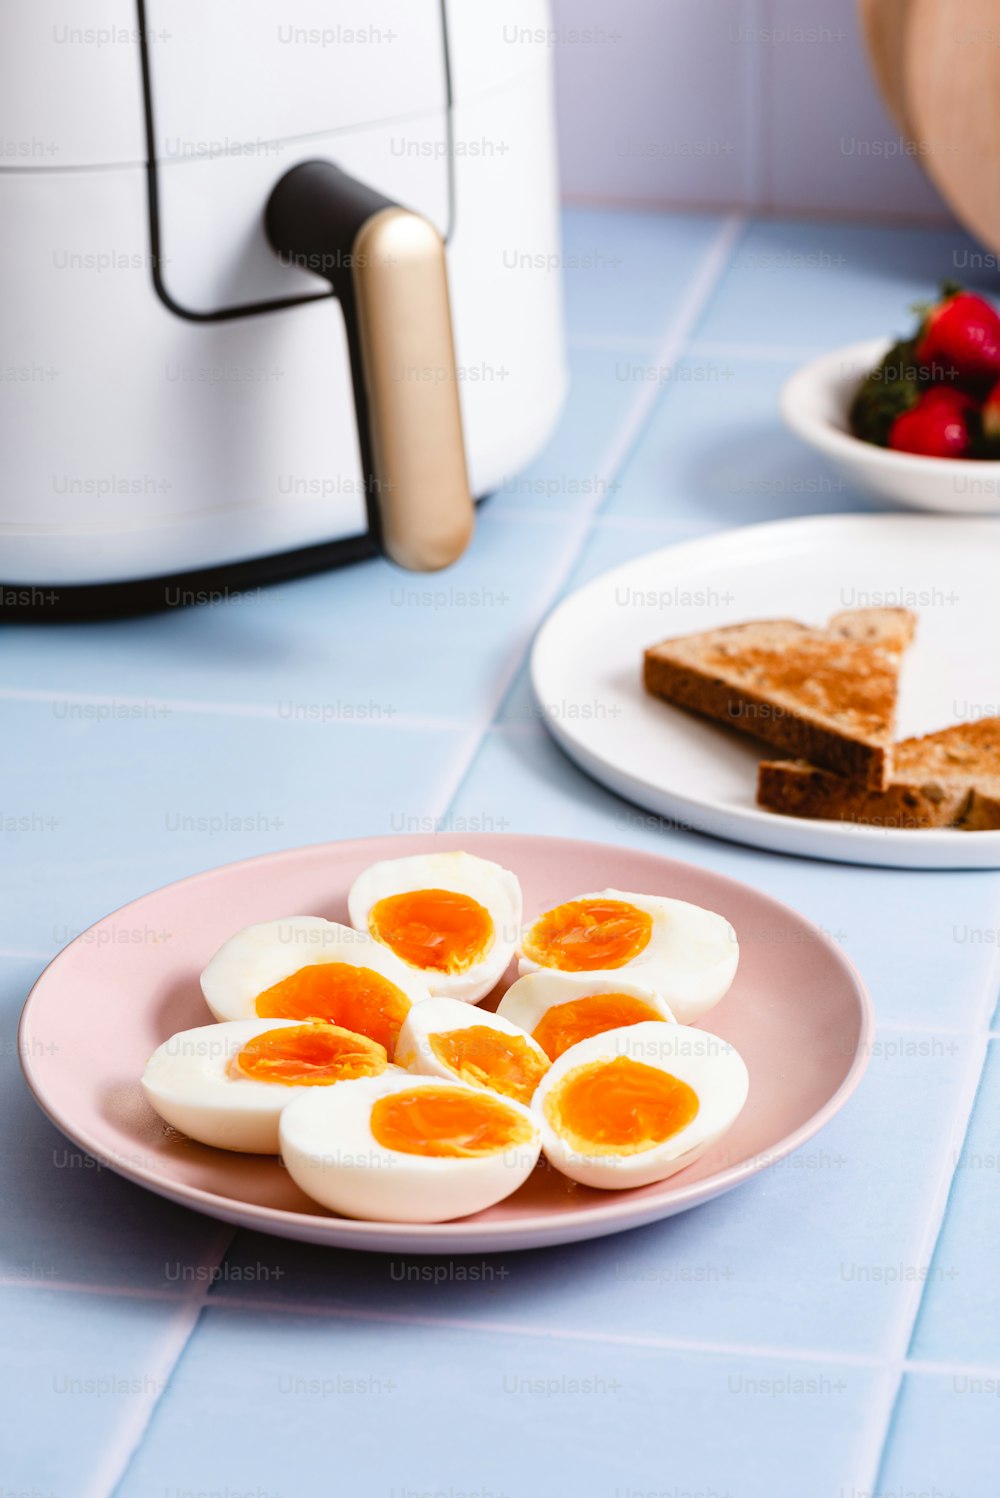 a plate of hard boiled eggs on a blue table